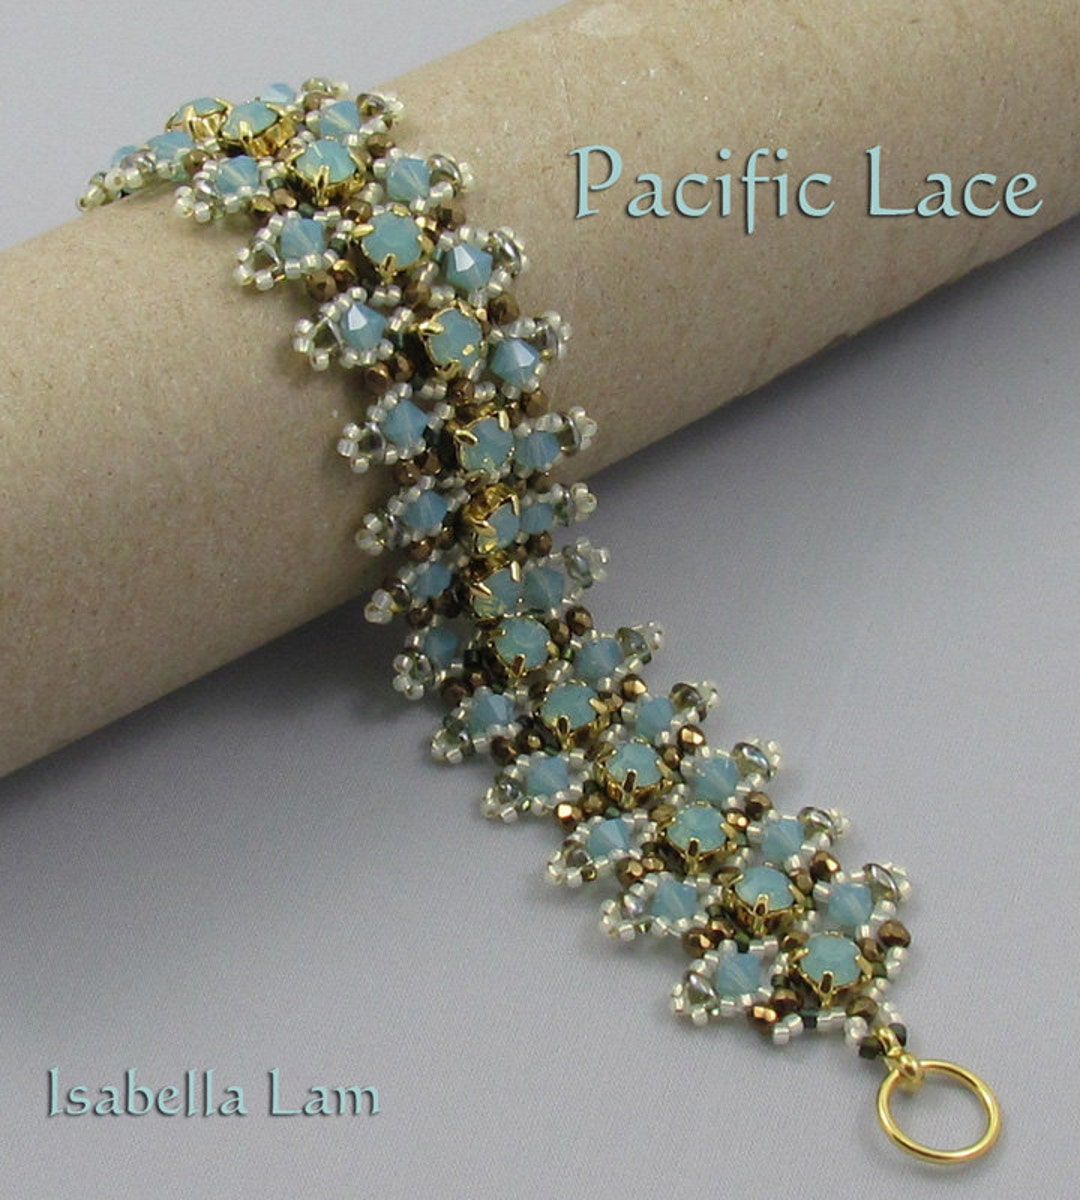 ☆ coquette bead bracelet ☆, ☆ made with elastic